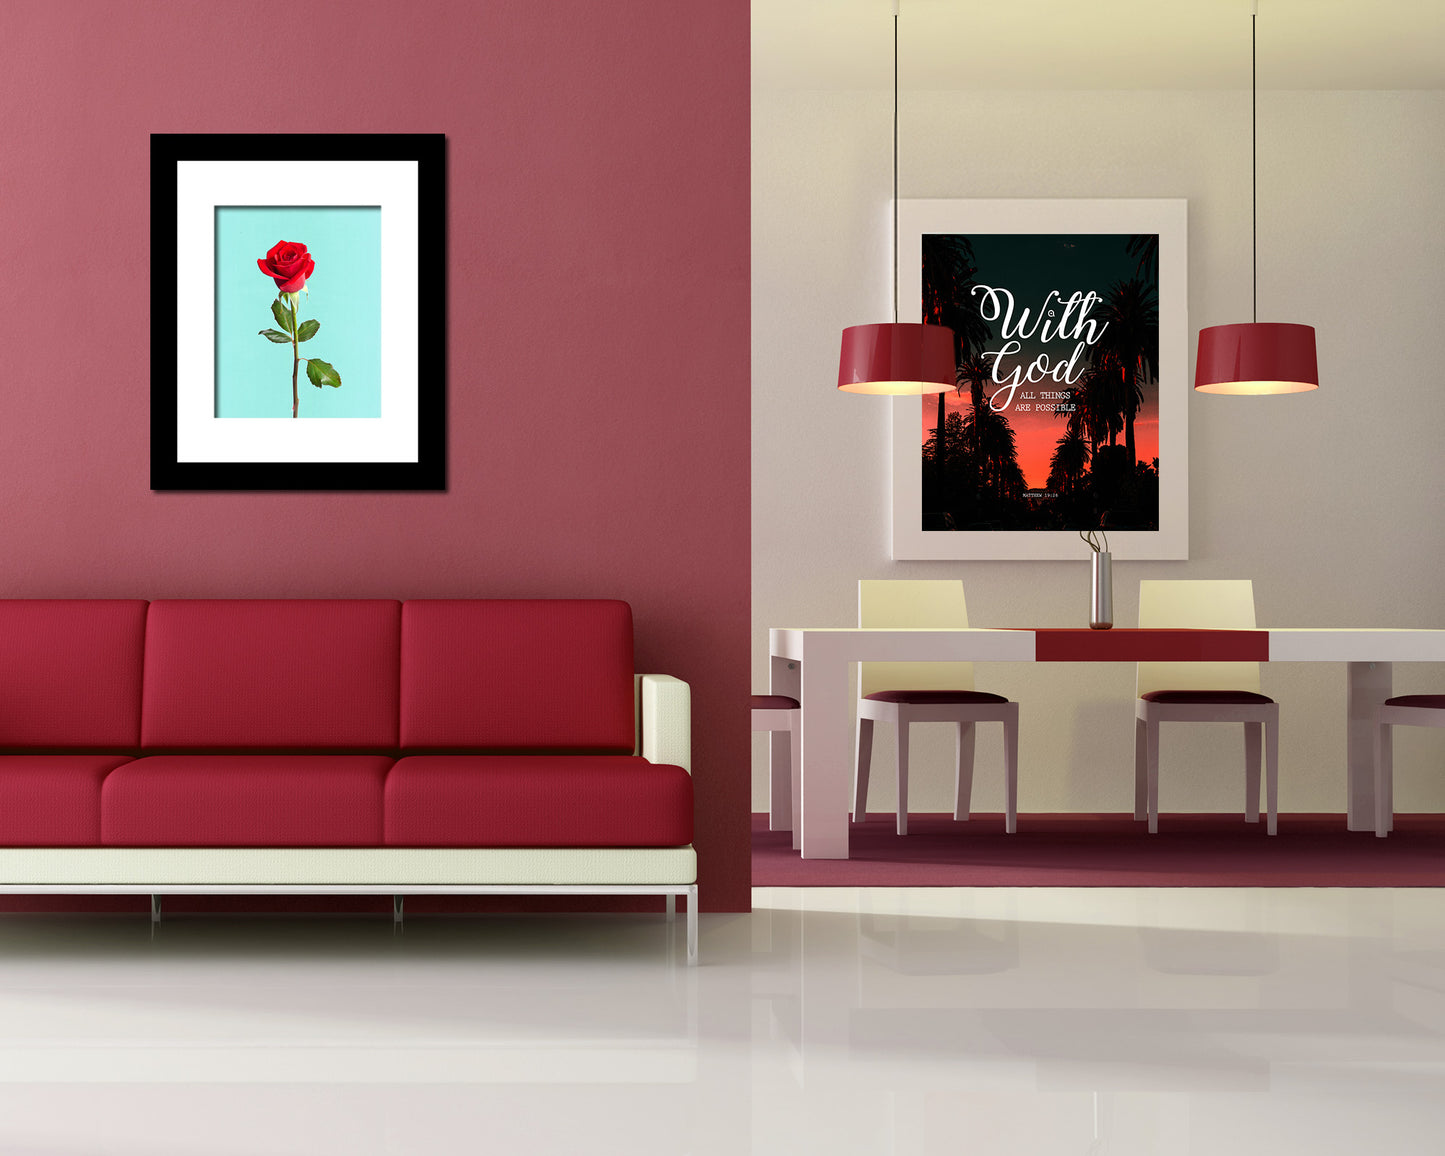 Red Globalrose Colorful Plants Art Wood Framed Print Wall Decor Gifts